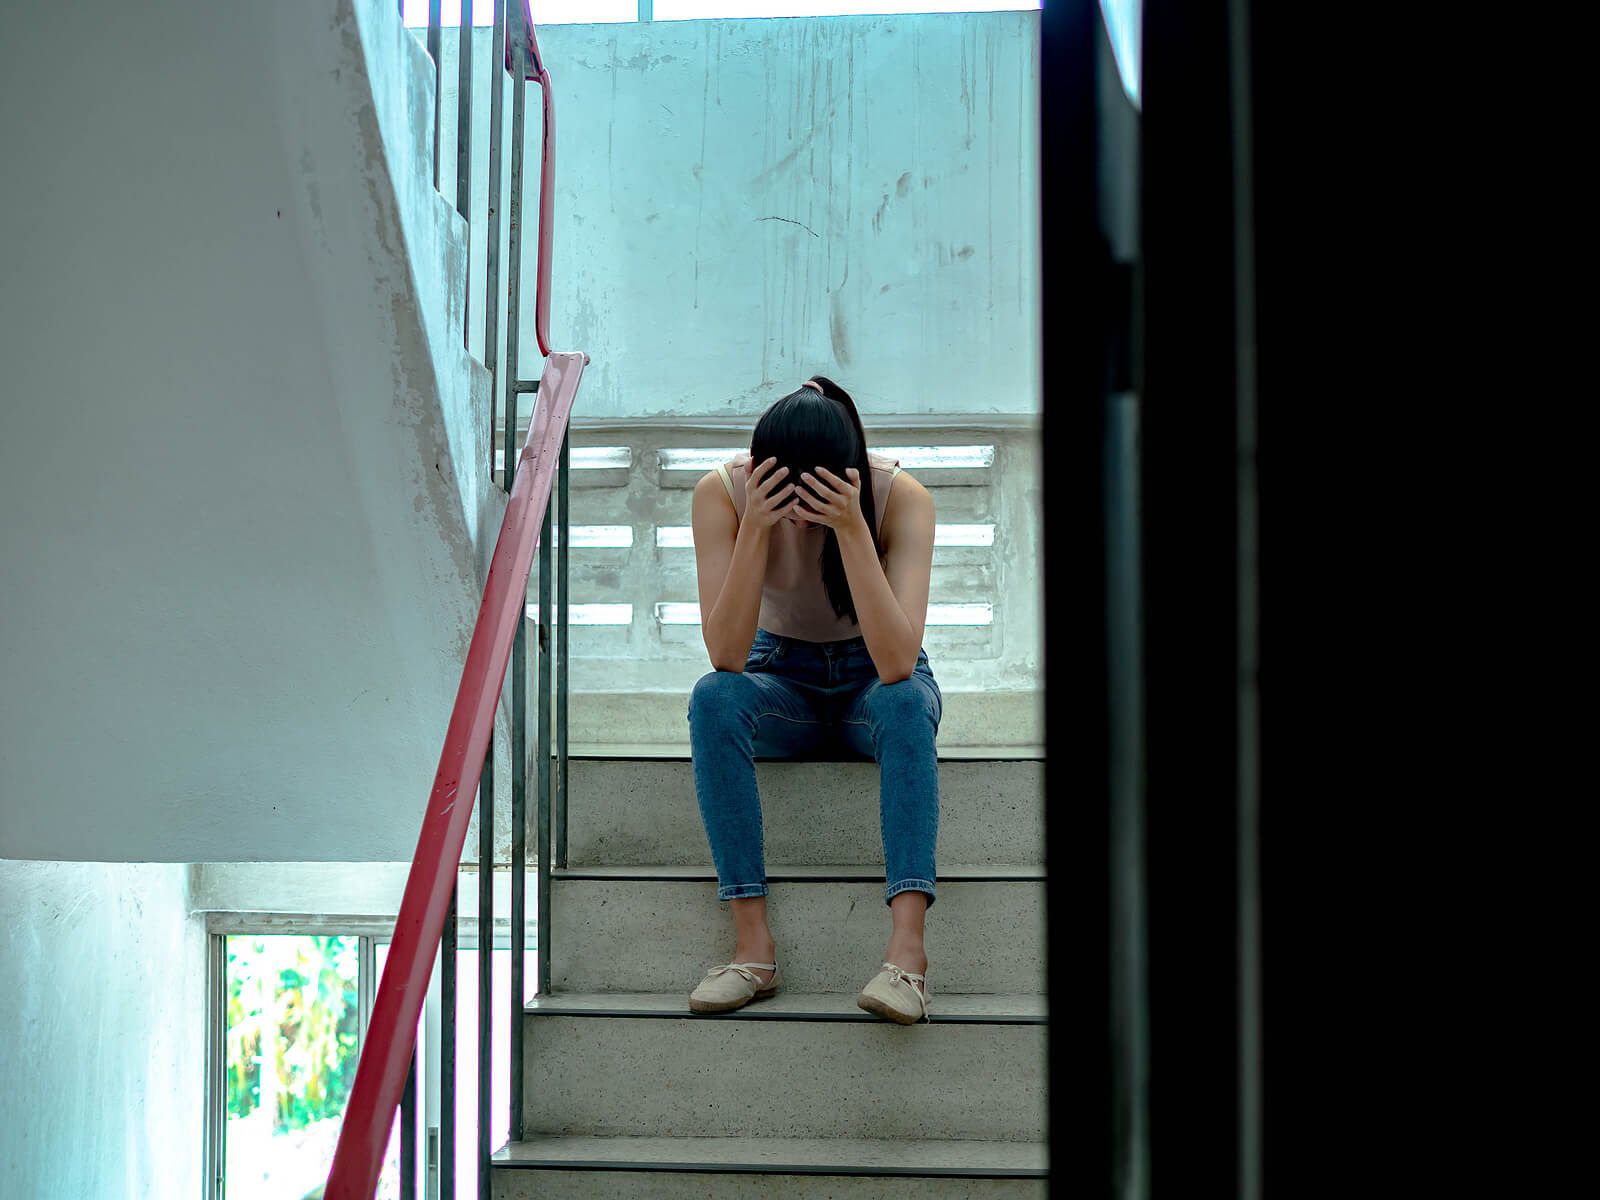 upset teen with head in her hands. Get support with child therapy and parenting counseling in Scotch Plains, NJ. Contact a parent coach for support with parenting help in Scotch Plains, NJ.